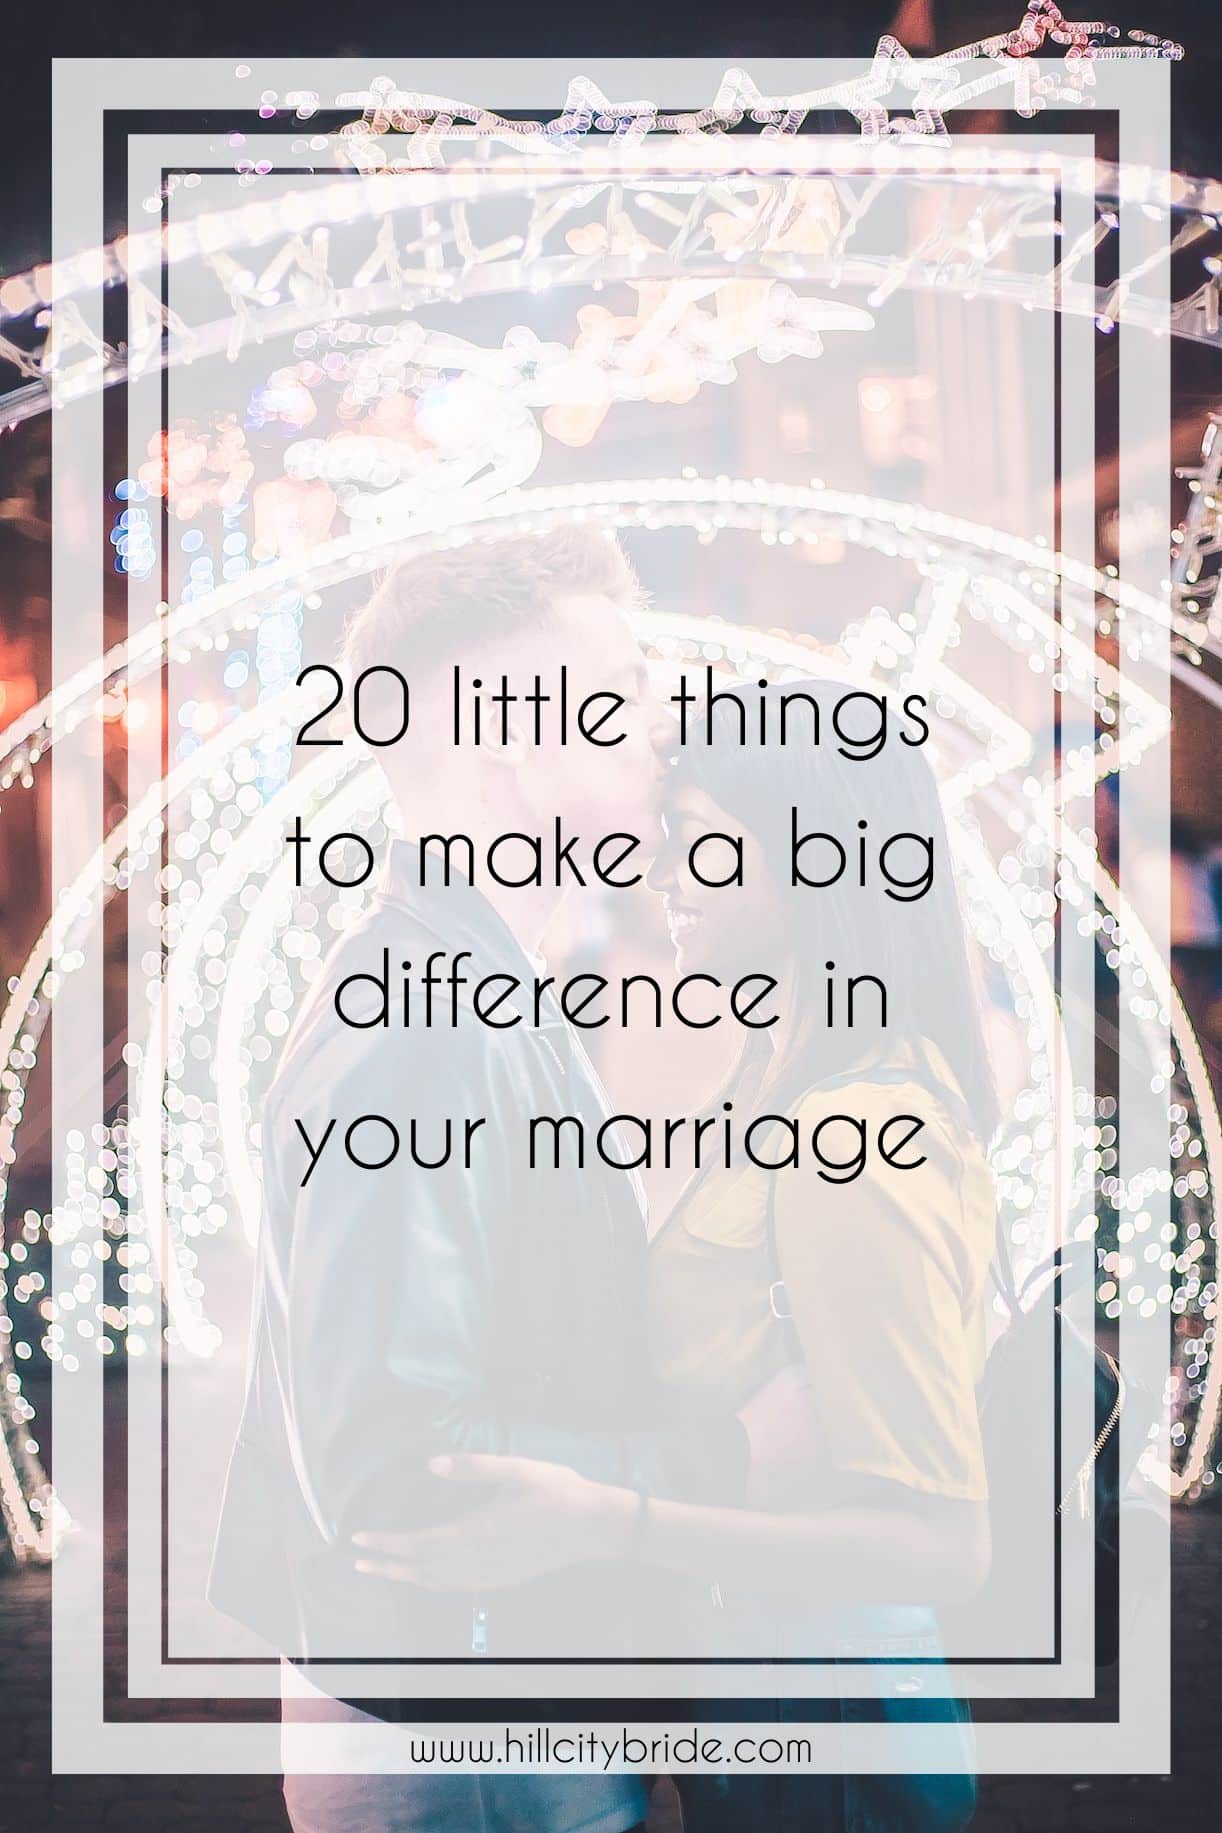 20 Little Things to Make a Big Difference in Your Marriage